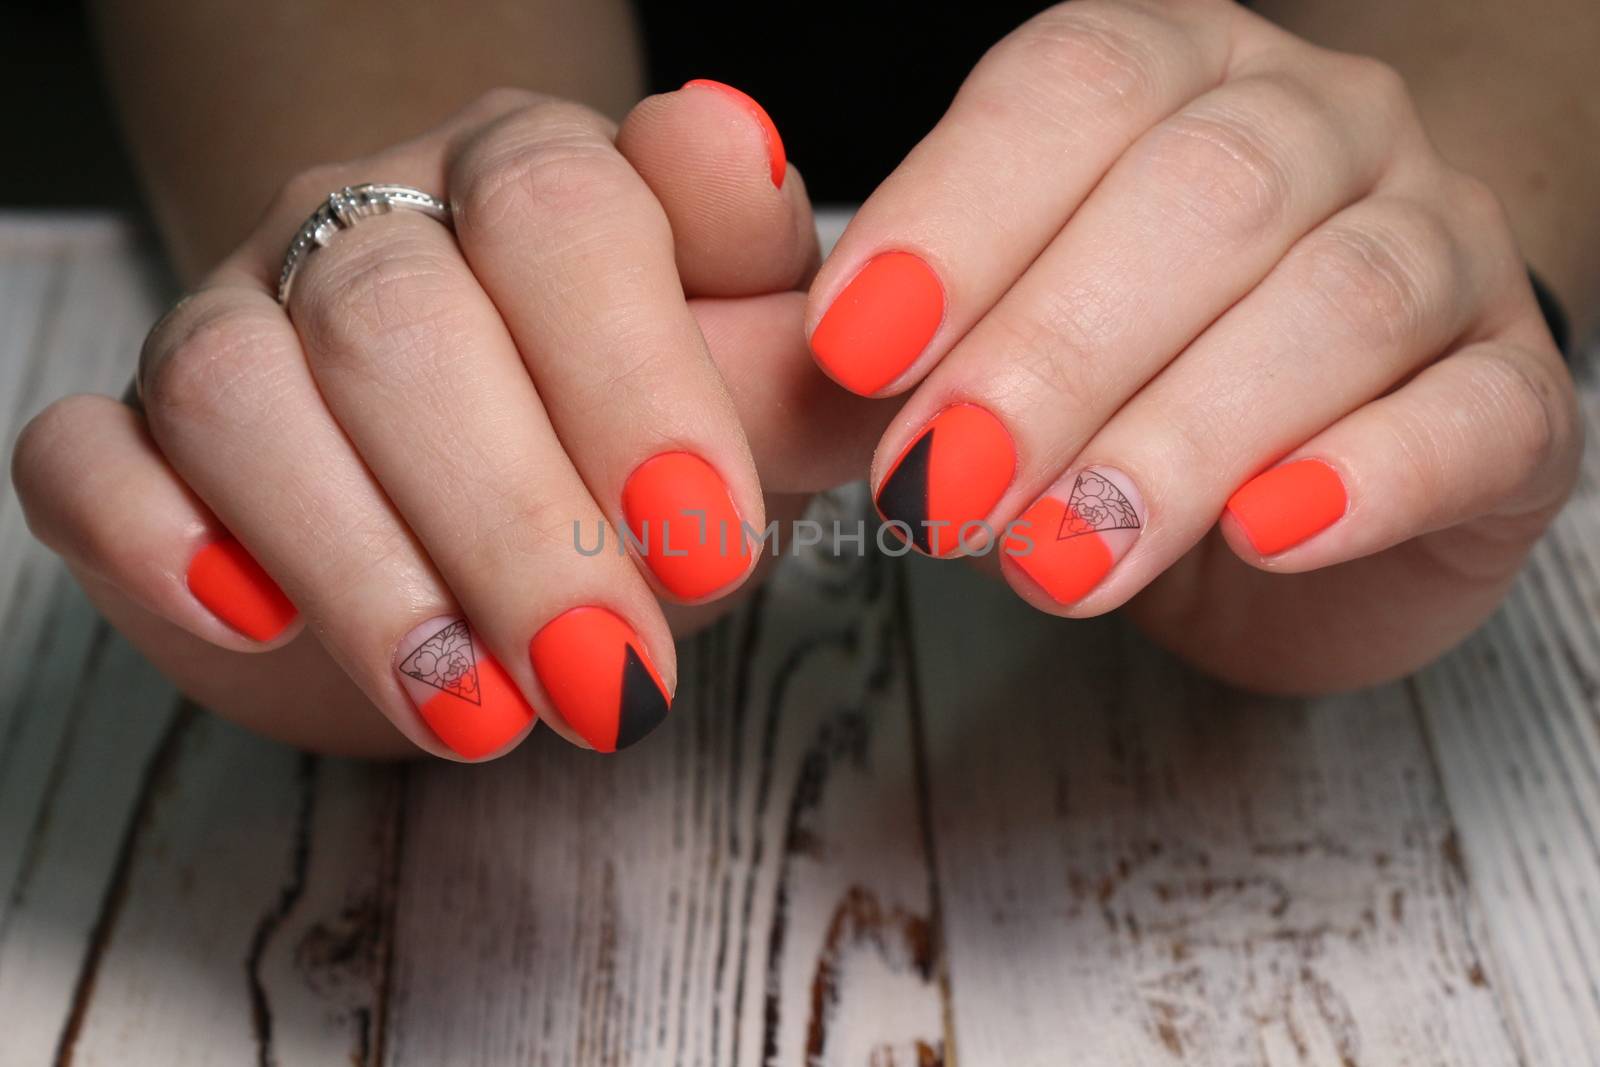 Multi-colored pastel manicure combined tone on tone with a striped background.Nail art by SmirMaxStock